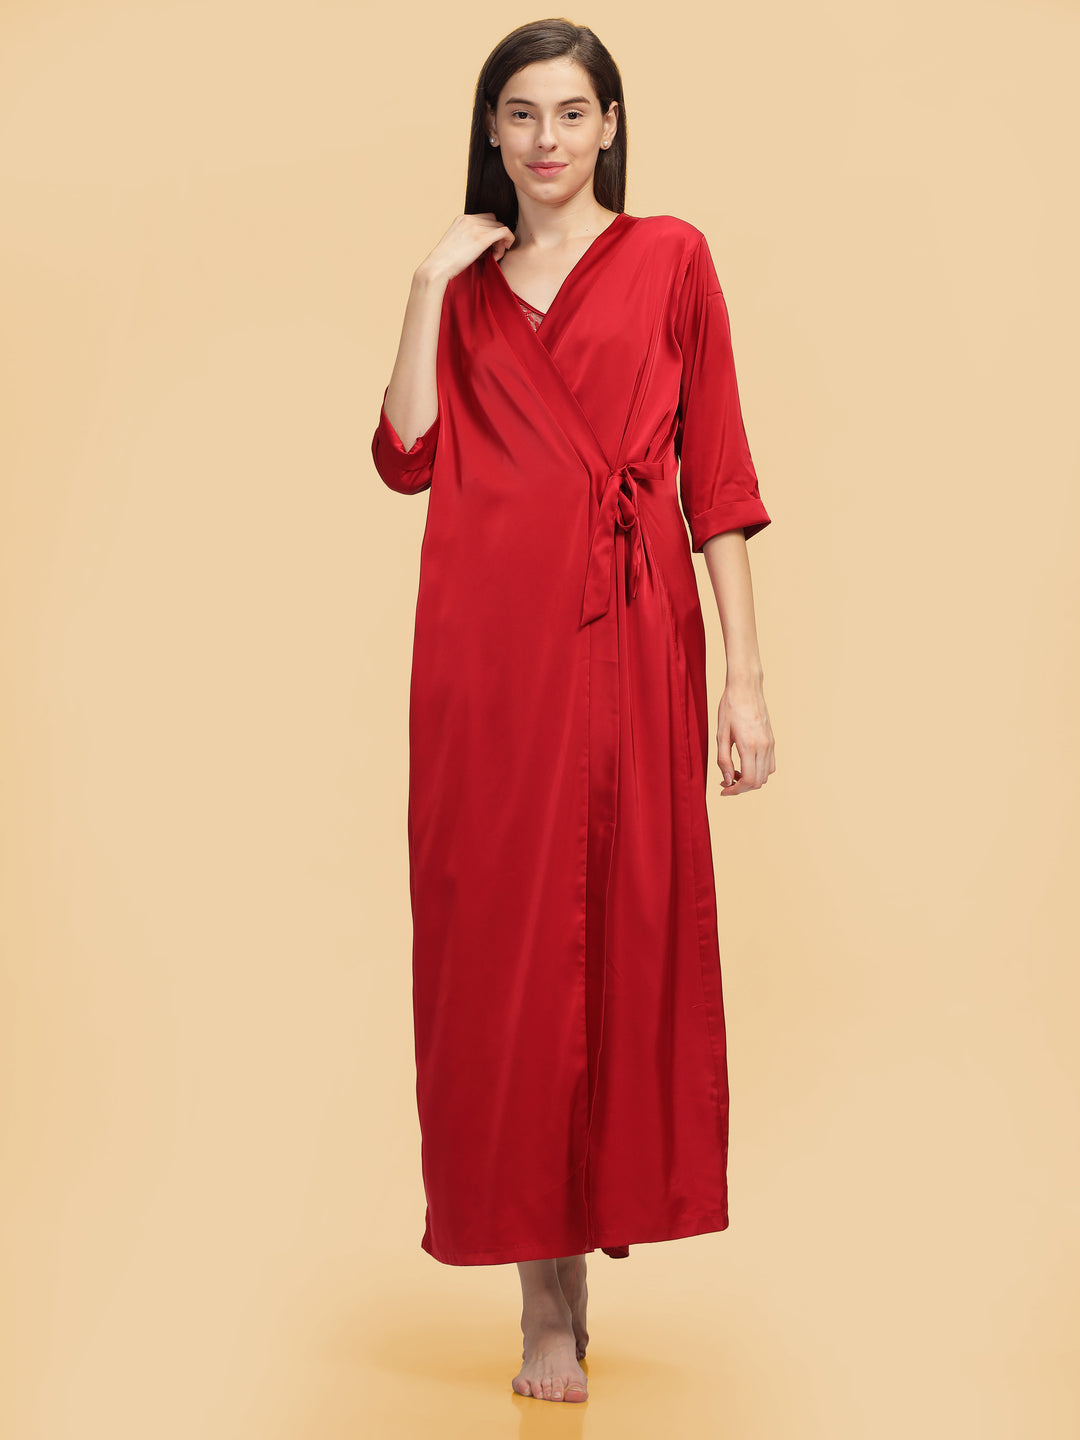 Honeymoon Night Lace Red Long Robe With Long Gown